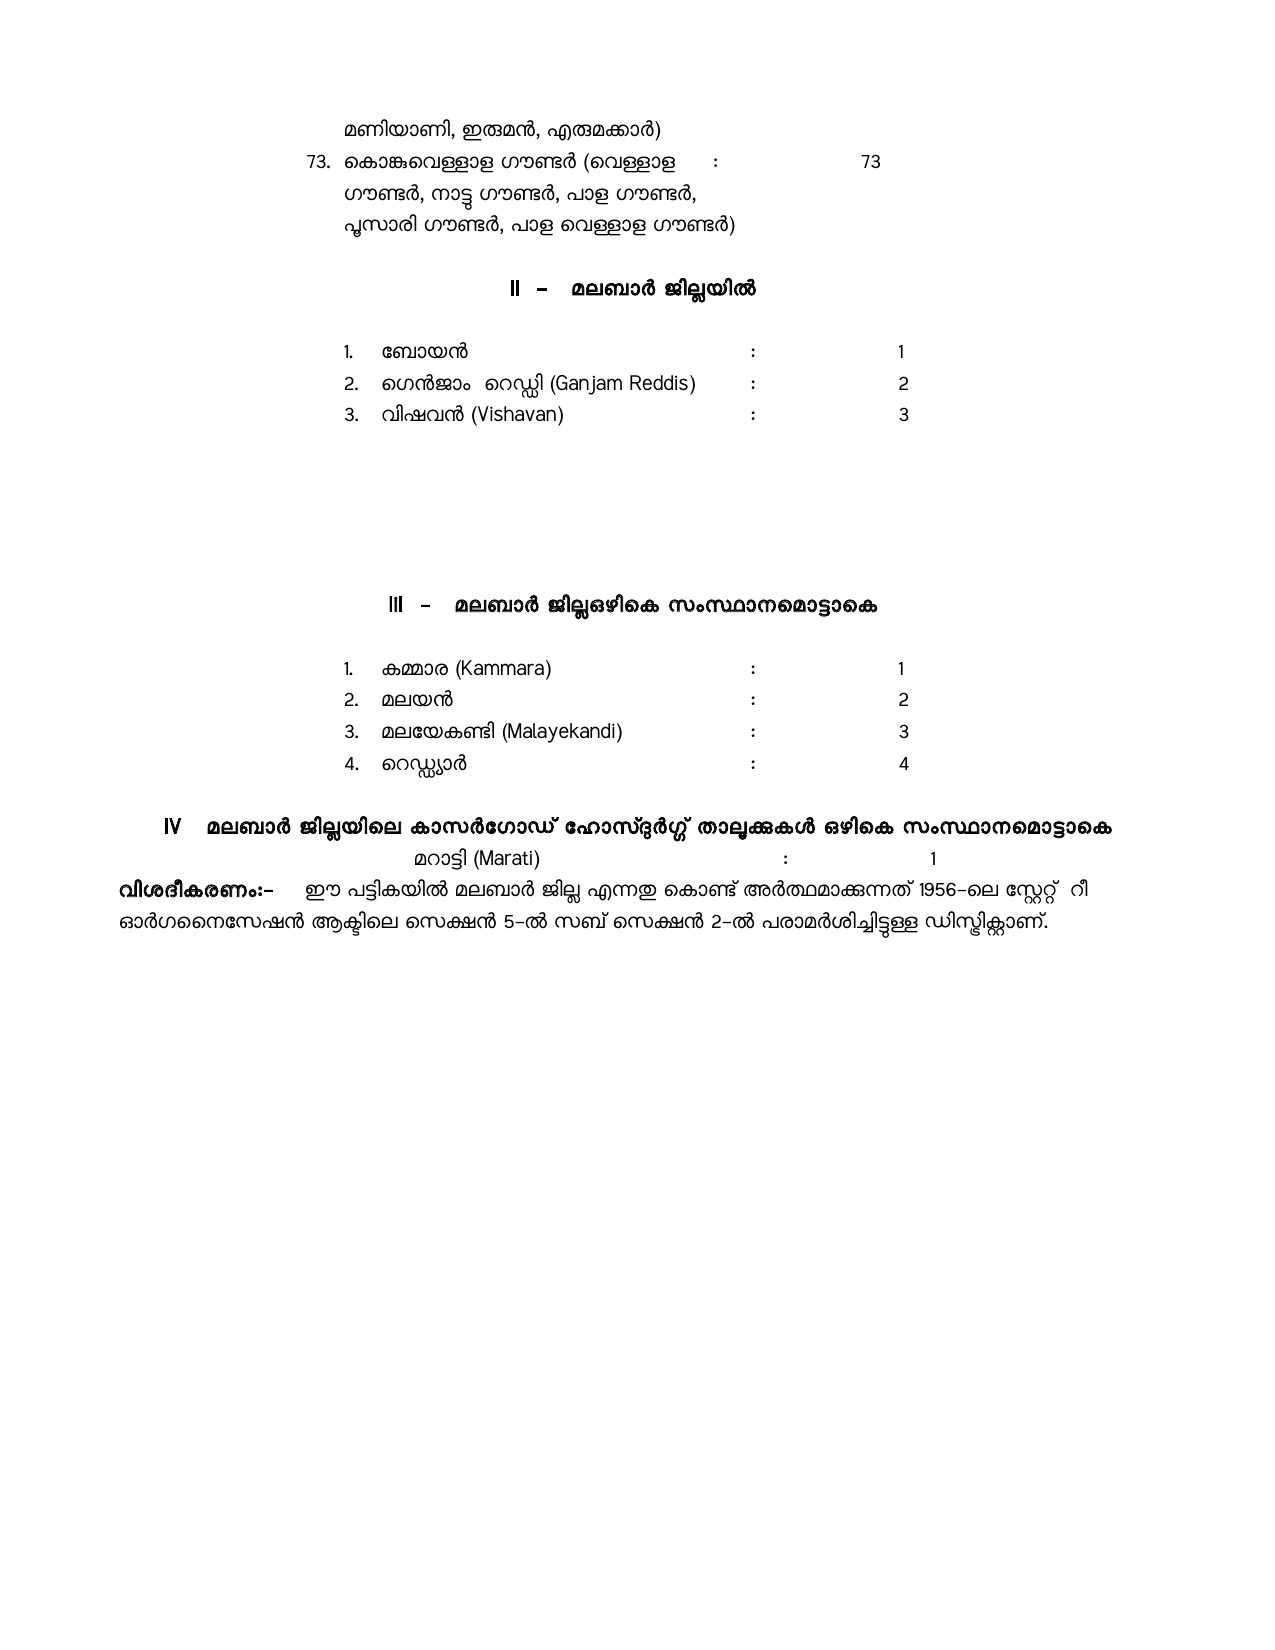 General Conditions and Certificate Formats in Malayalam - Notification Image 33